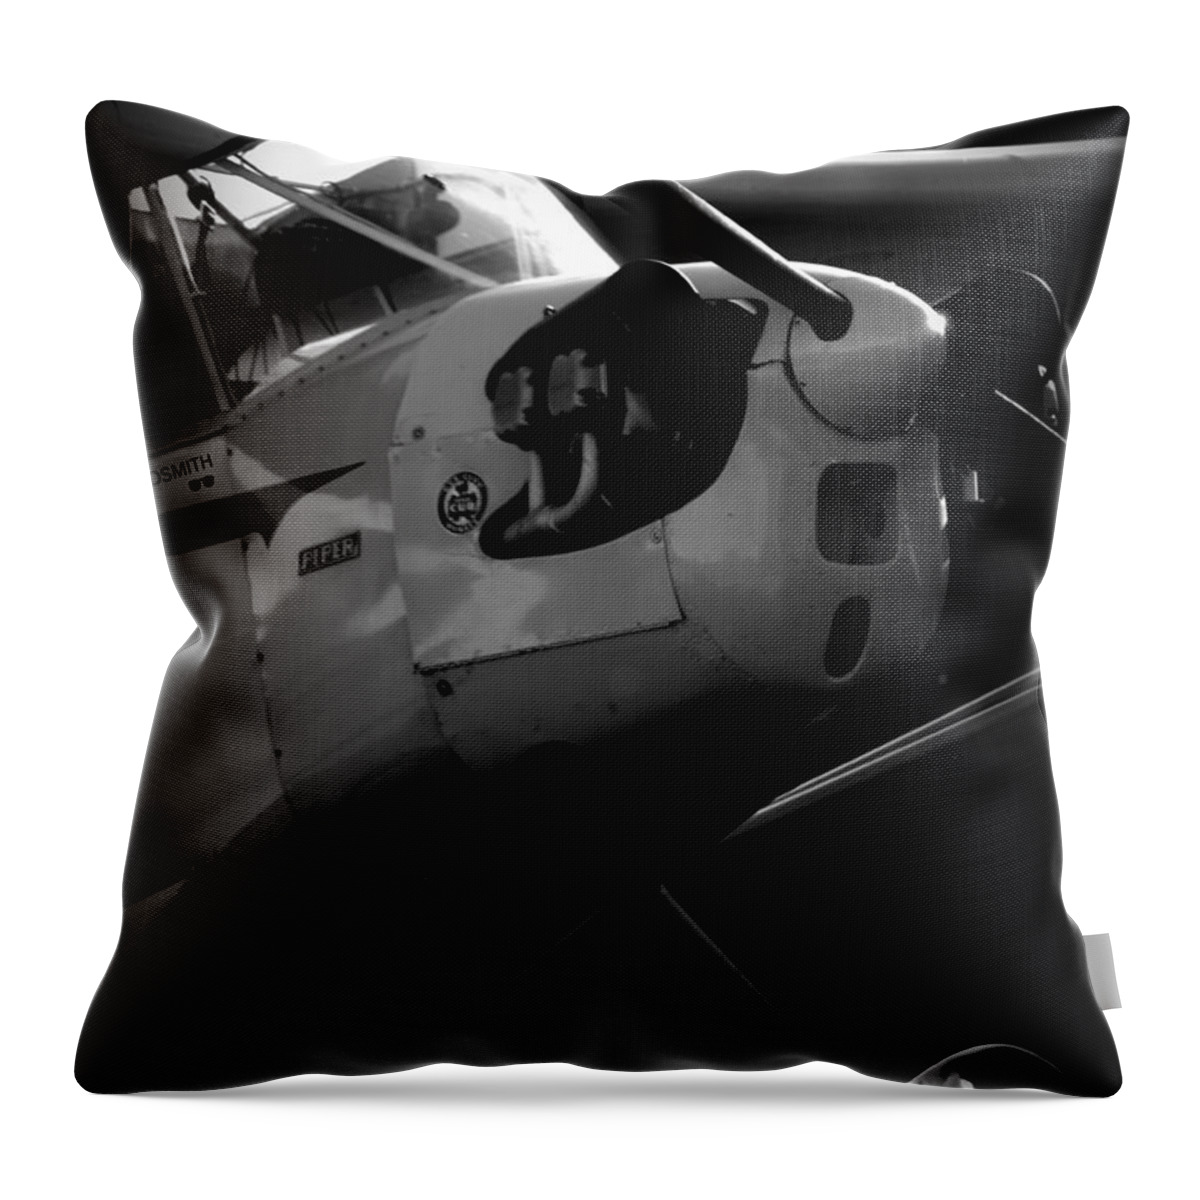 Tourist Trap Throw Pillow featuring the photograph Tourist Trap by Edward Smith